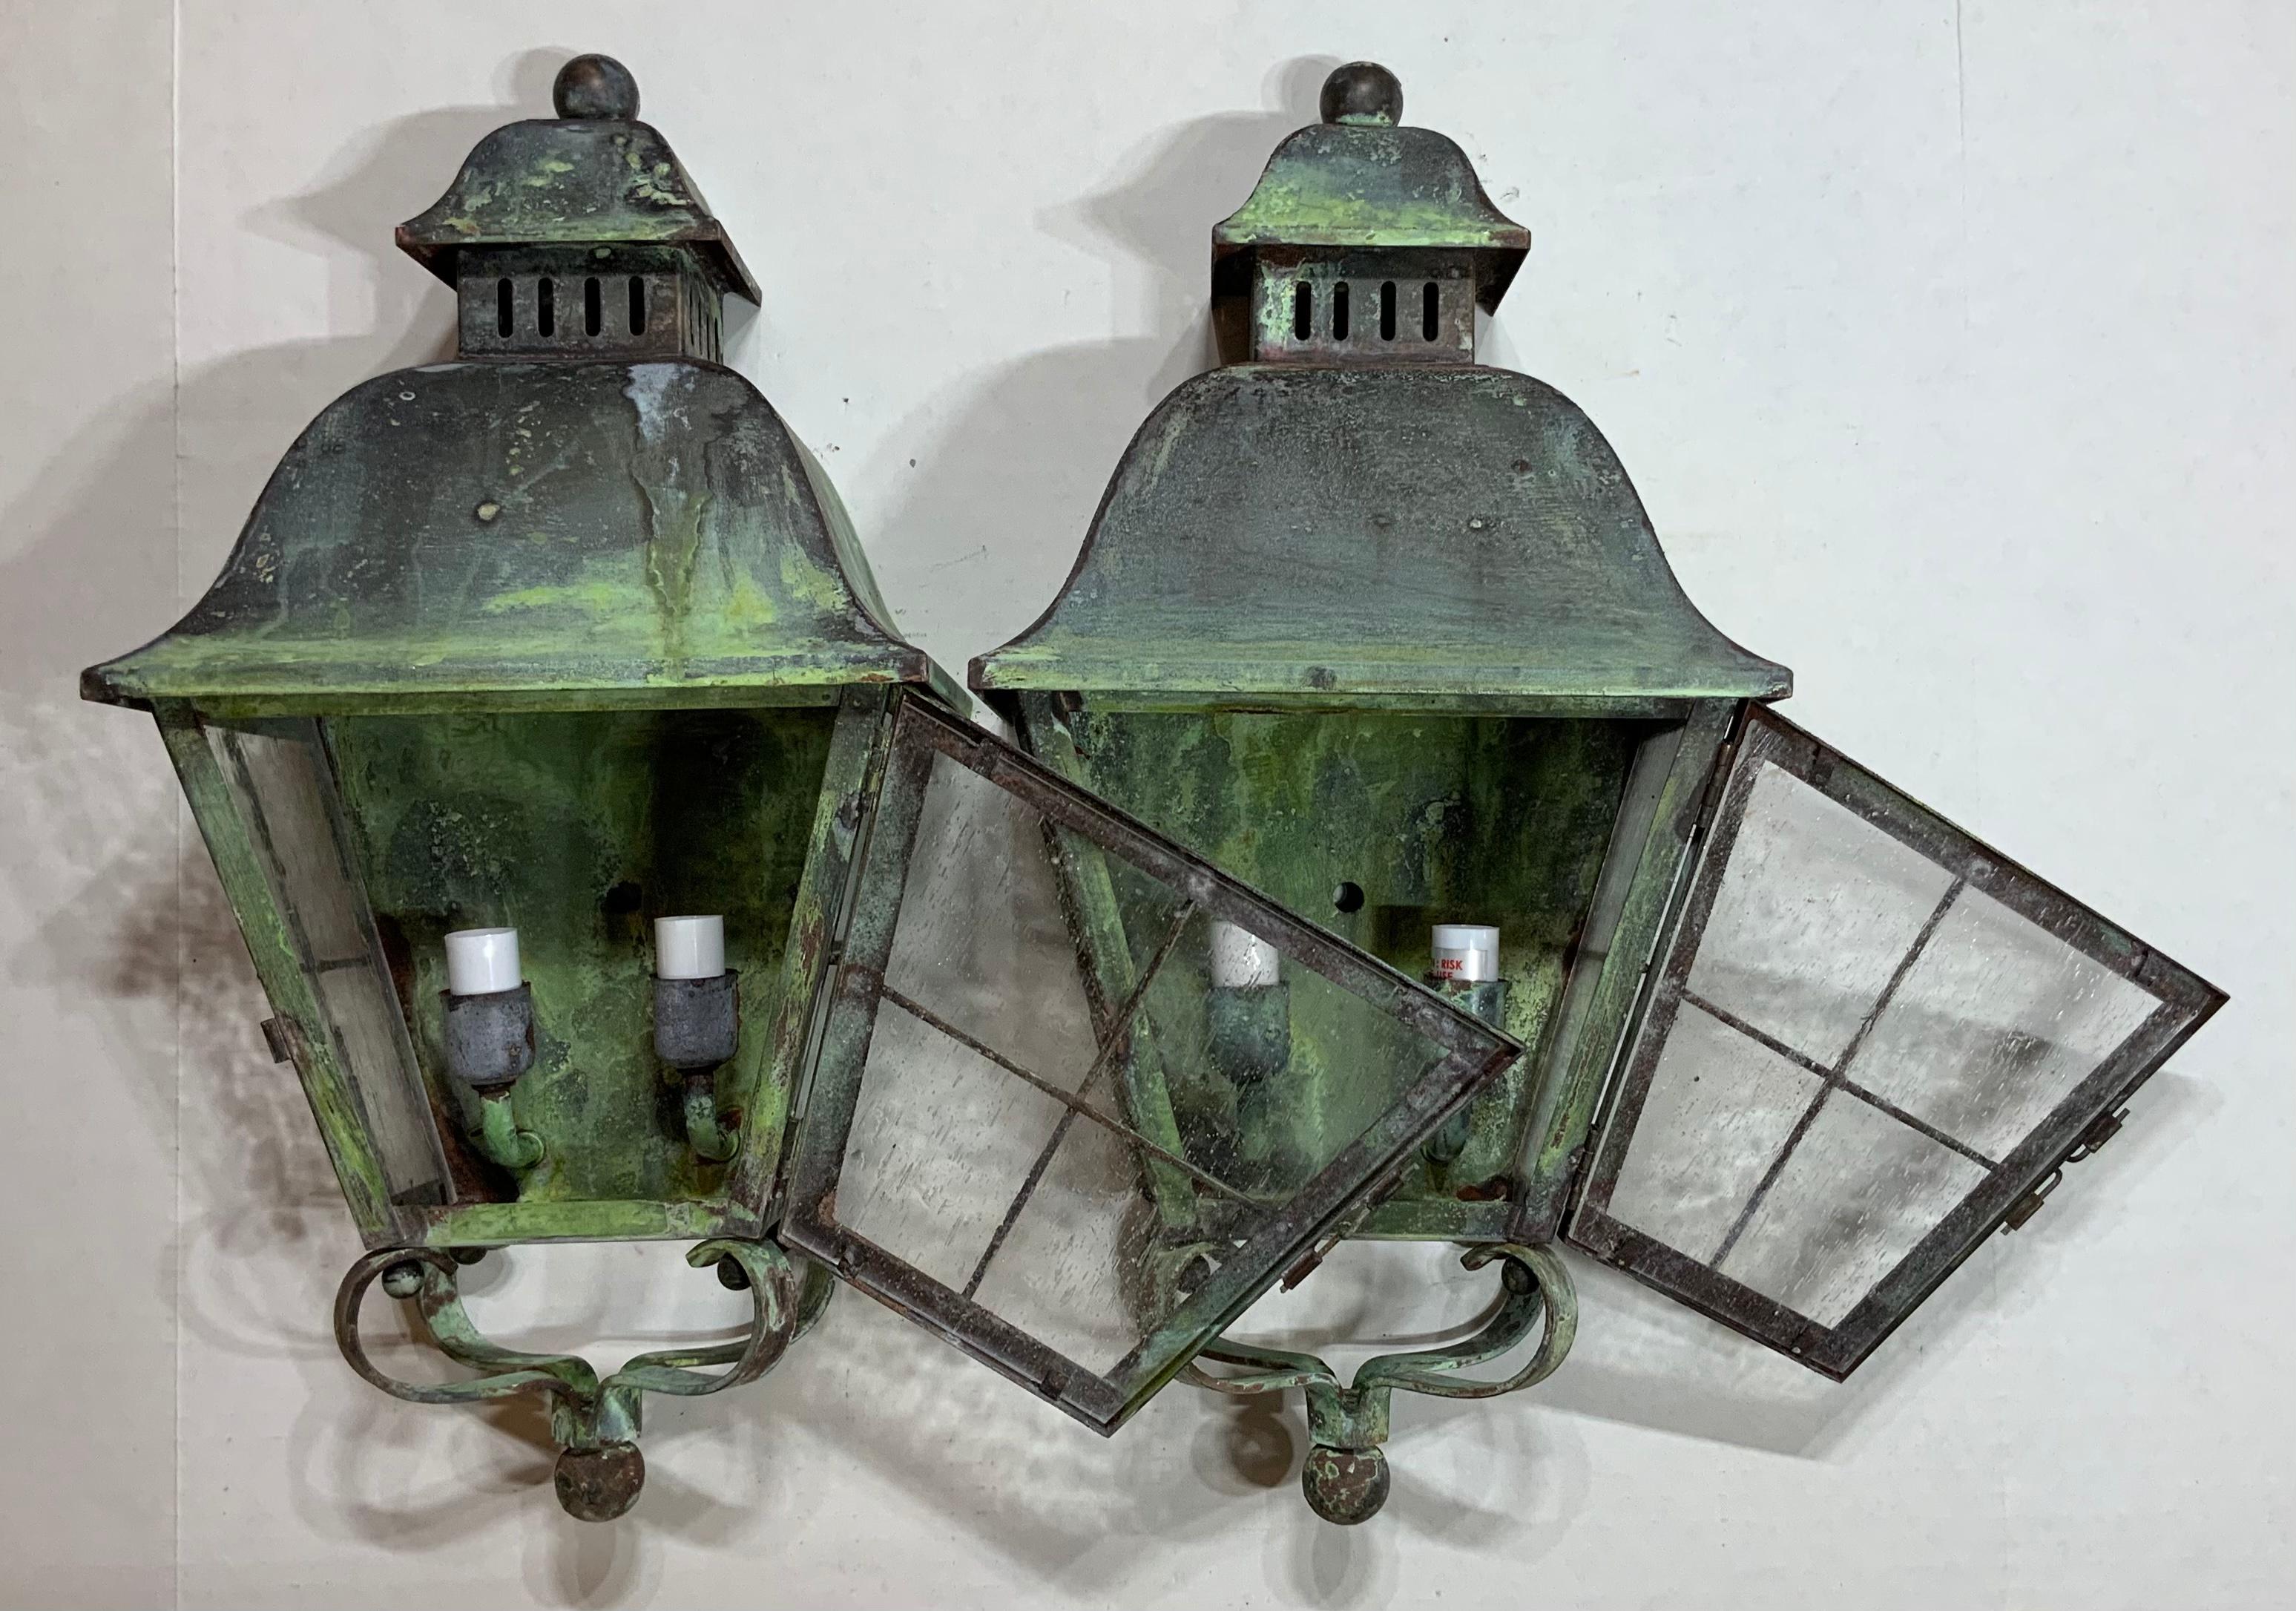 Elegant pair of wall hanging lantern hand forged with solid brass and have beautiful patina, seeded glass. Electrified with tow 40/watt lights each, up to US code, UL approved.
Great decorative pair of lantern. Suitable for wet locations.